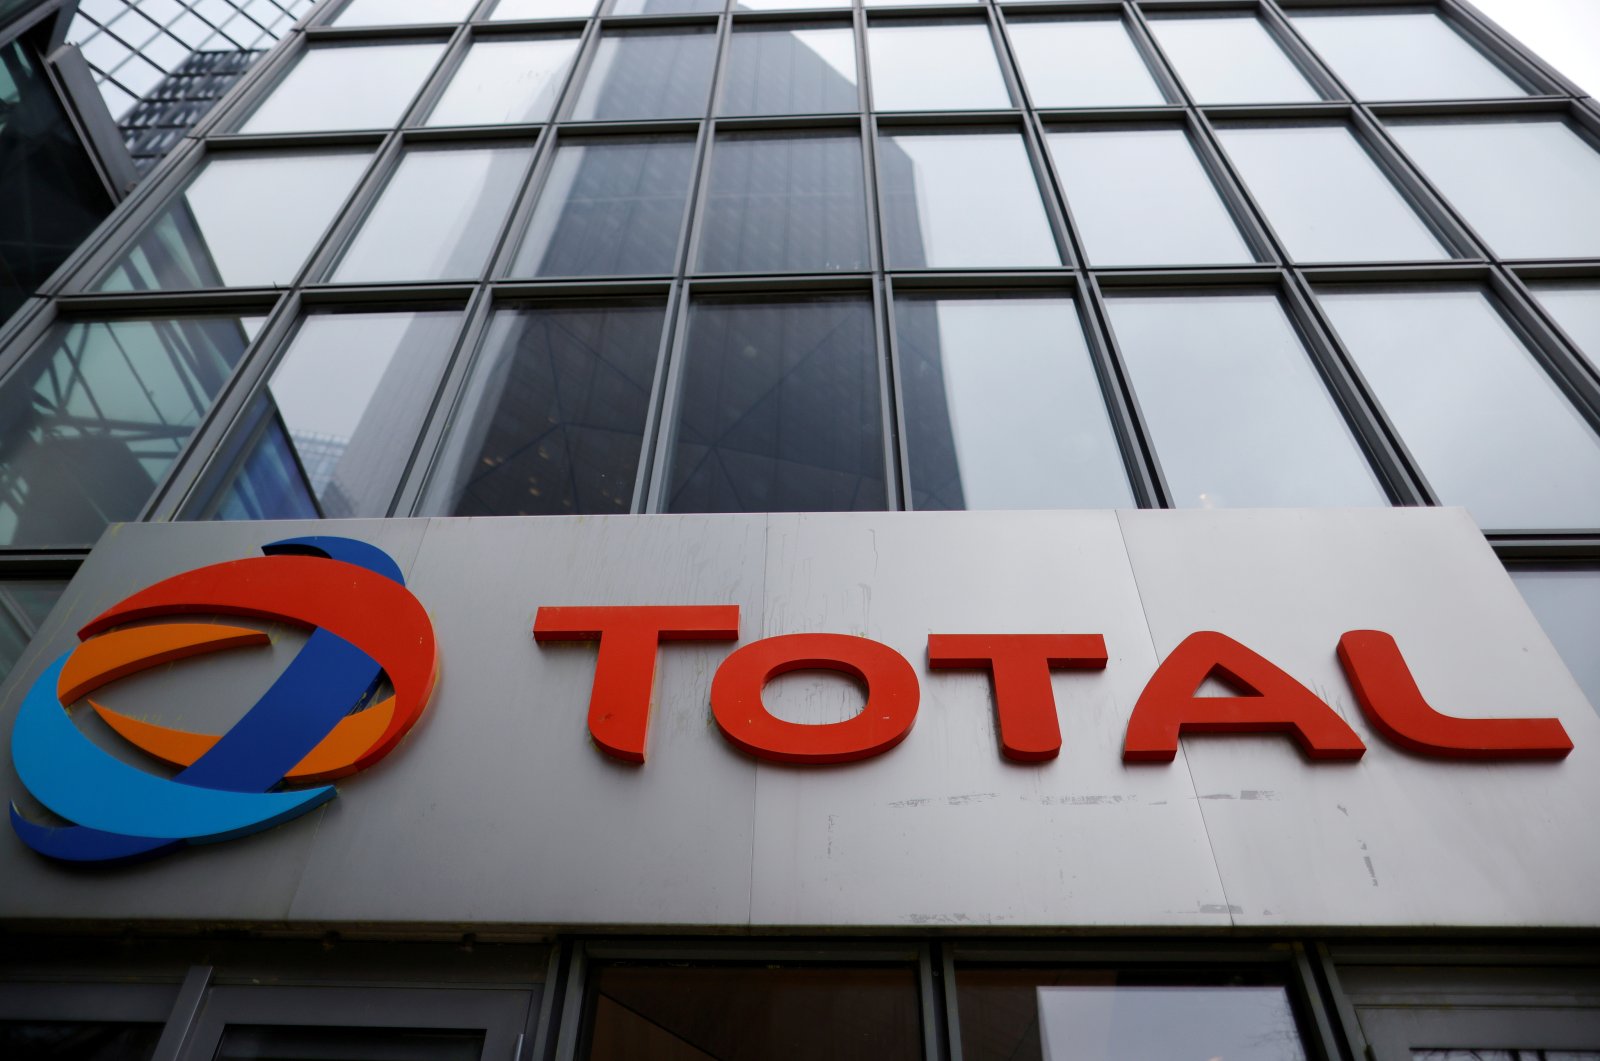 The logo of French oil and gas company Total is seen at La Defense business district in Courbevoie near Paris, France, February 8, 2021. (Reuters Photo)